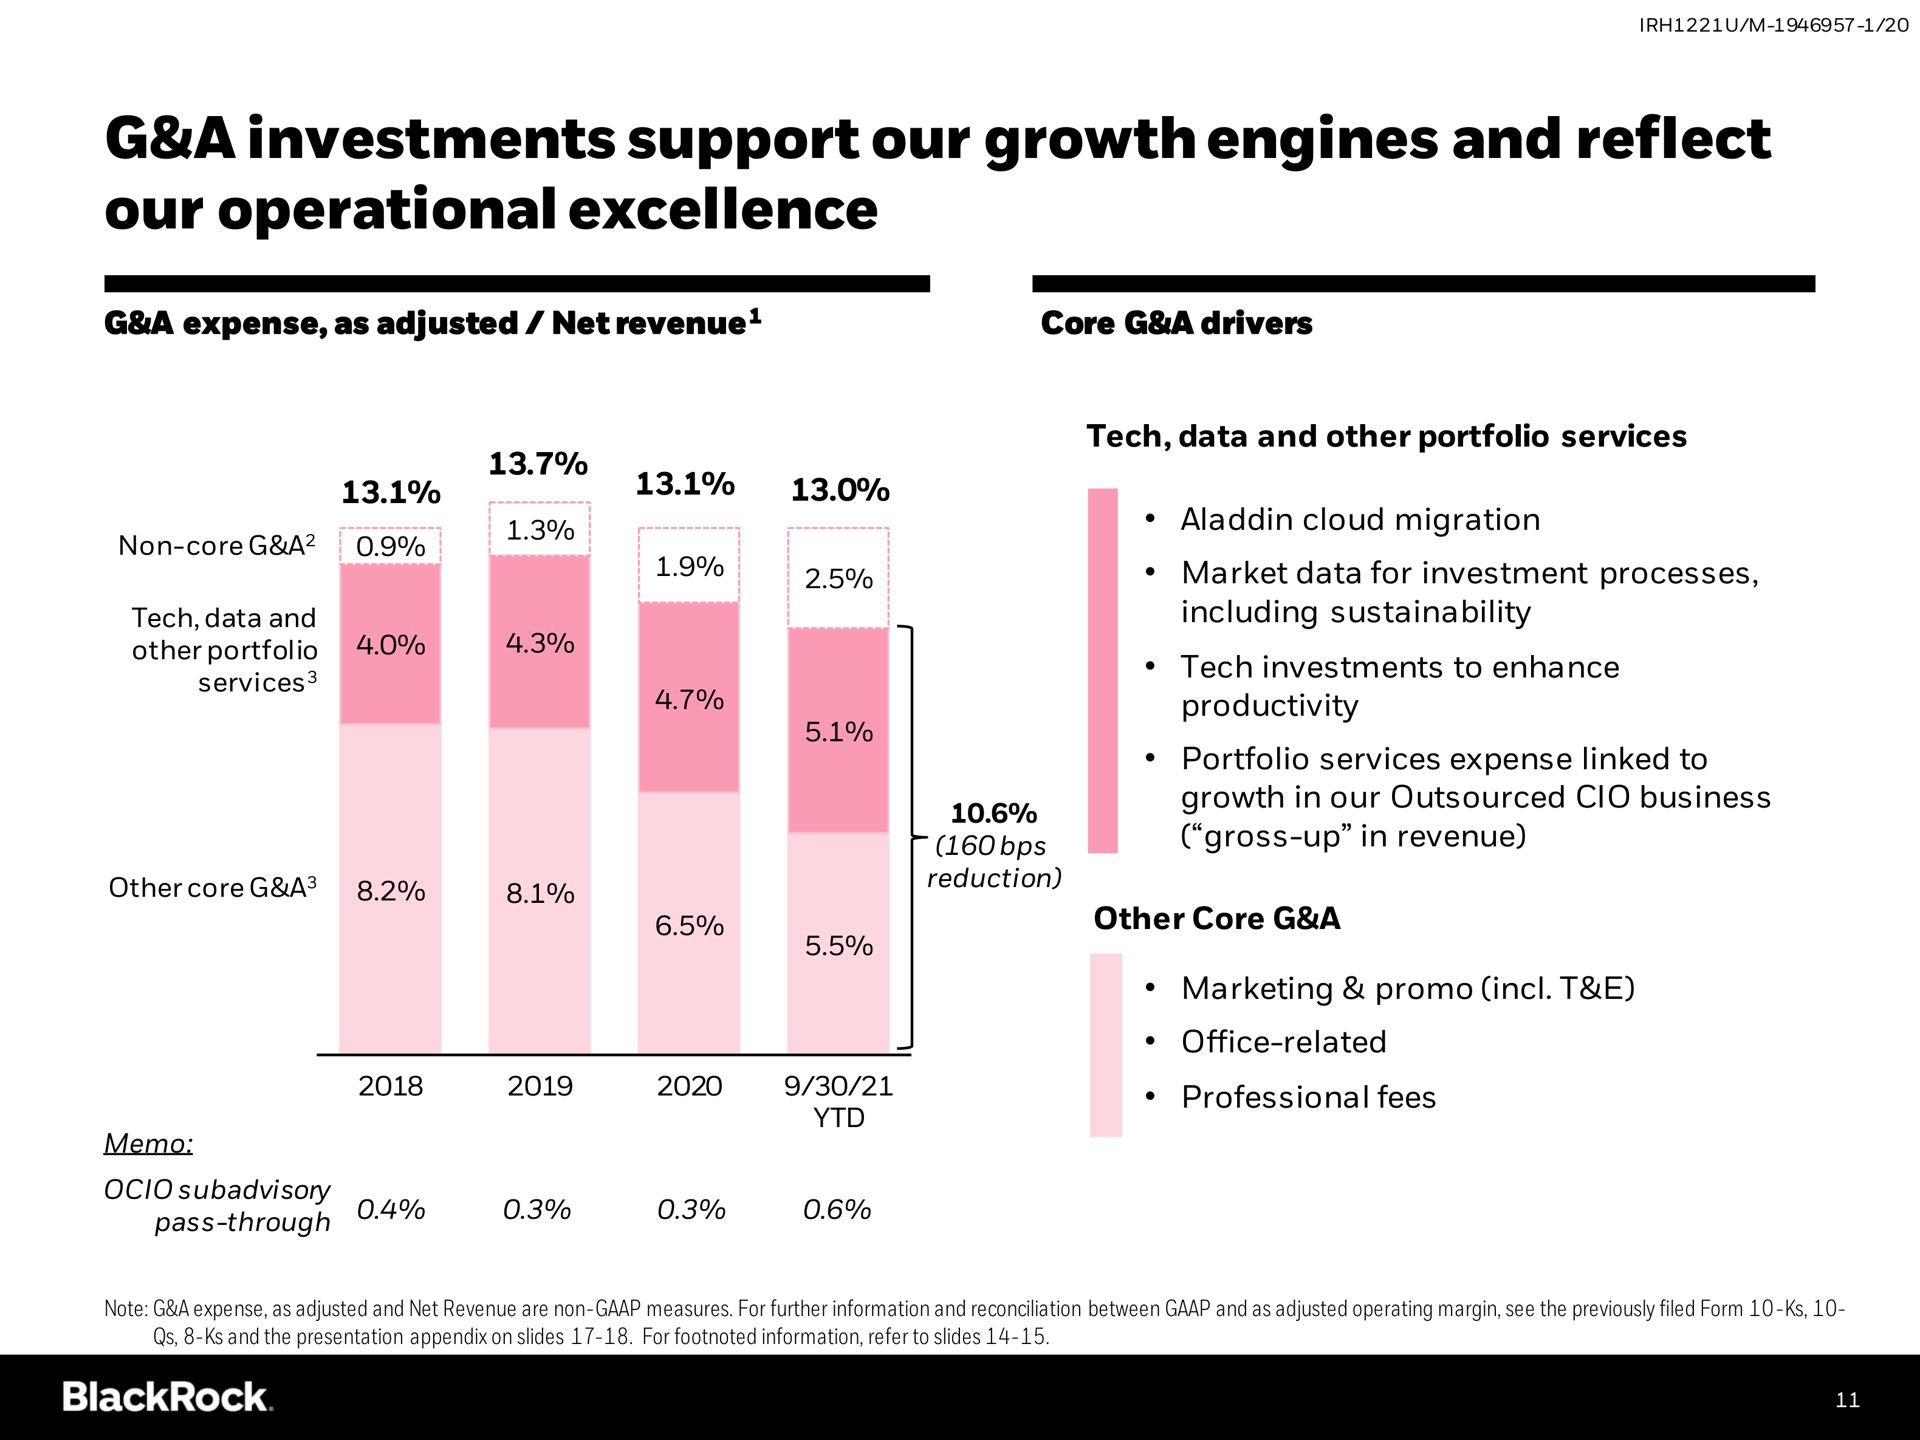 a investments support our growth engines and reflect our operational excellence | BlackRock